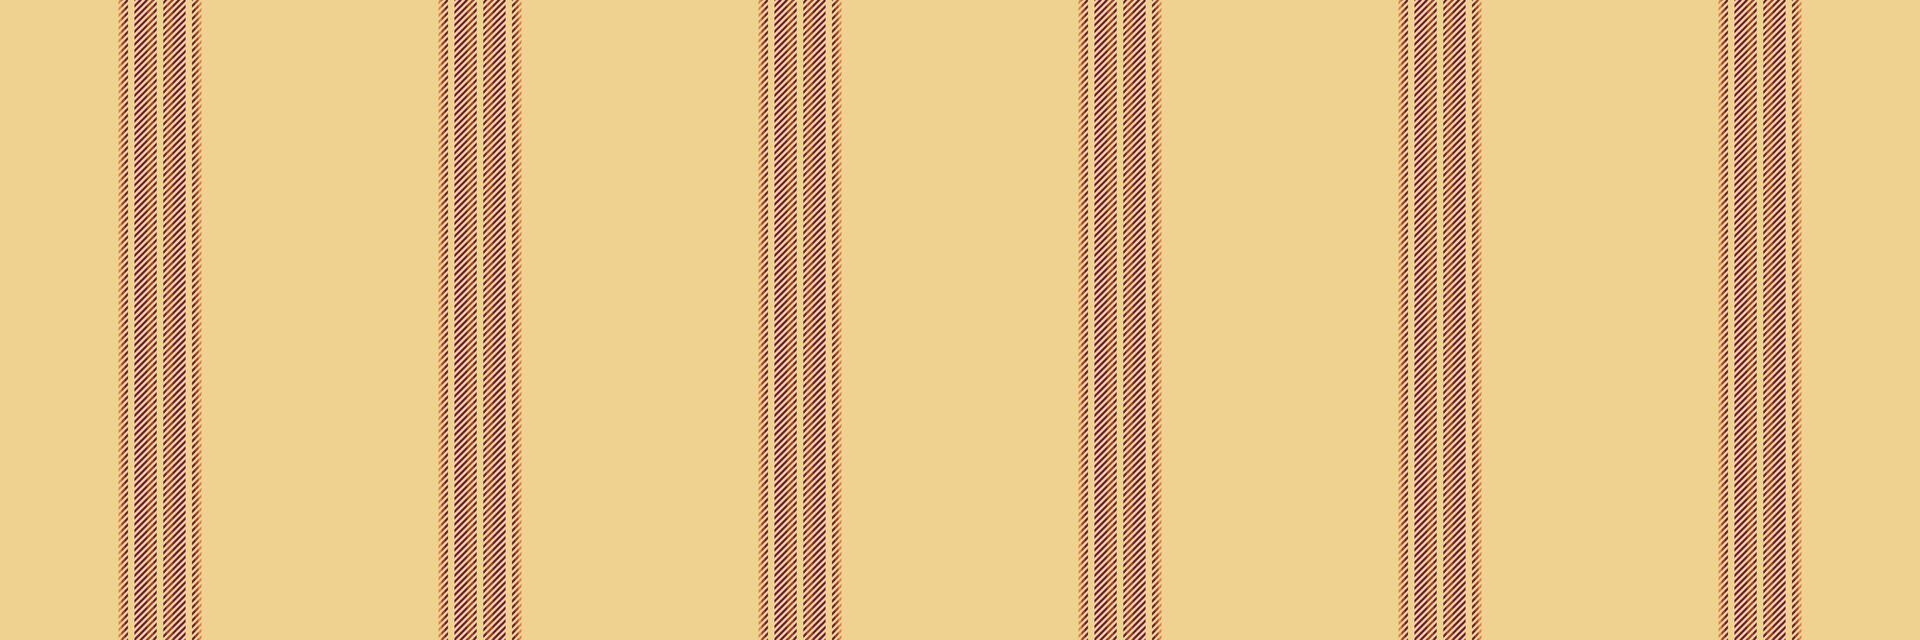 Invitation background seamless , chic vertical textile fabric. Proud stripe pattern lines texture in amber and pink colors. vector